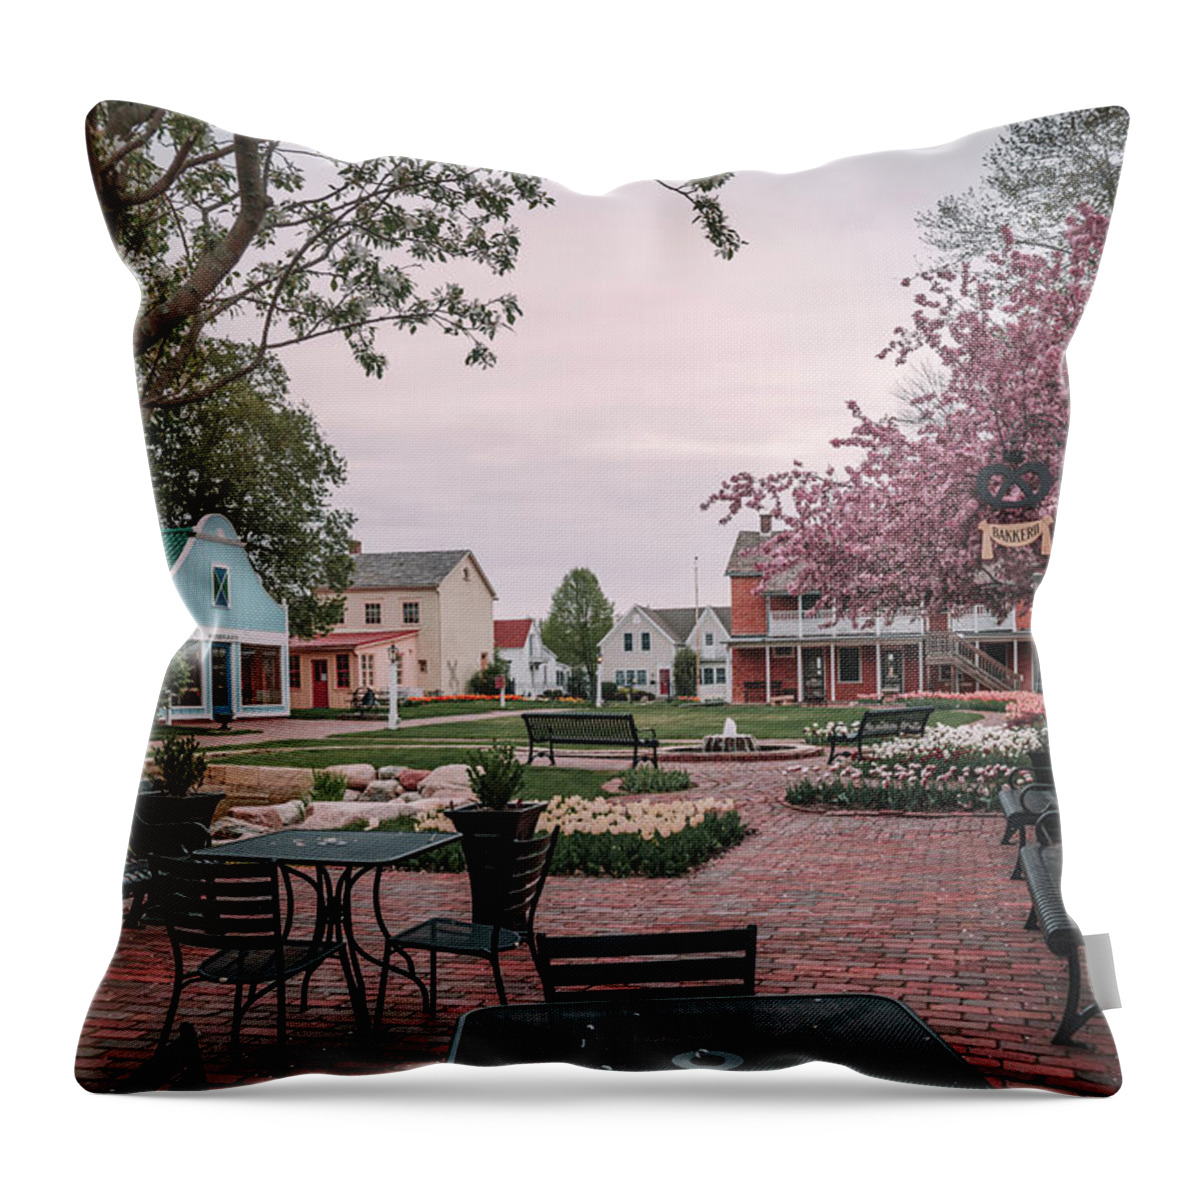 Pella Throw Pillow featuring the photograph Pella's Historical Dutch Village by Bella B Photography